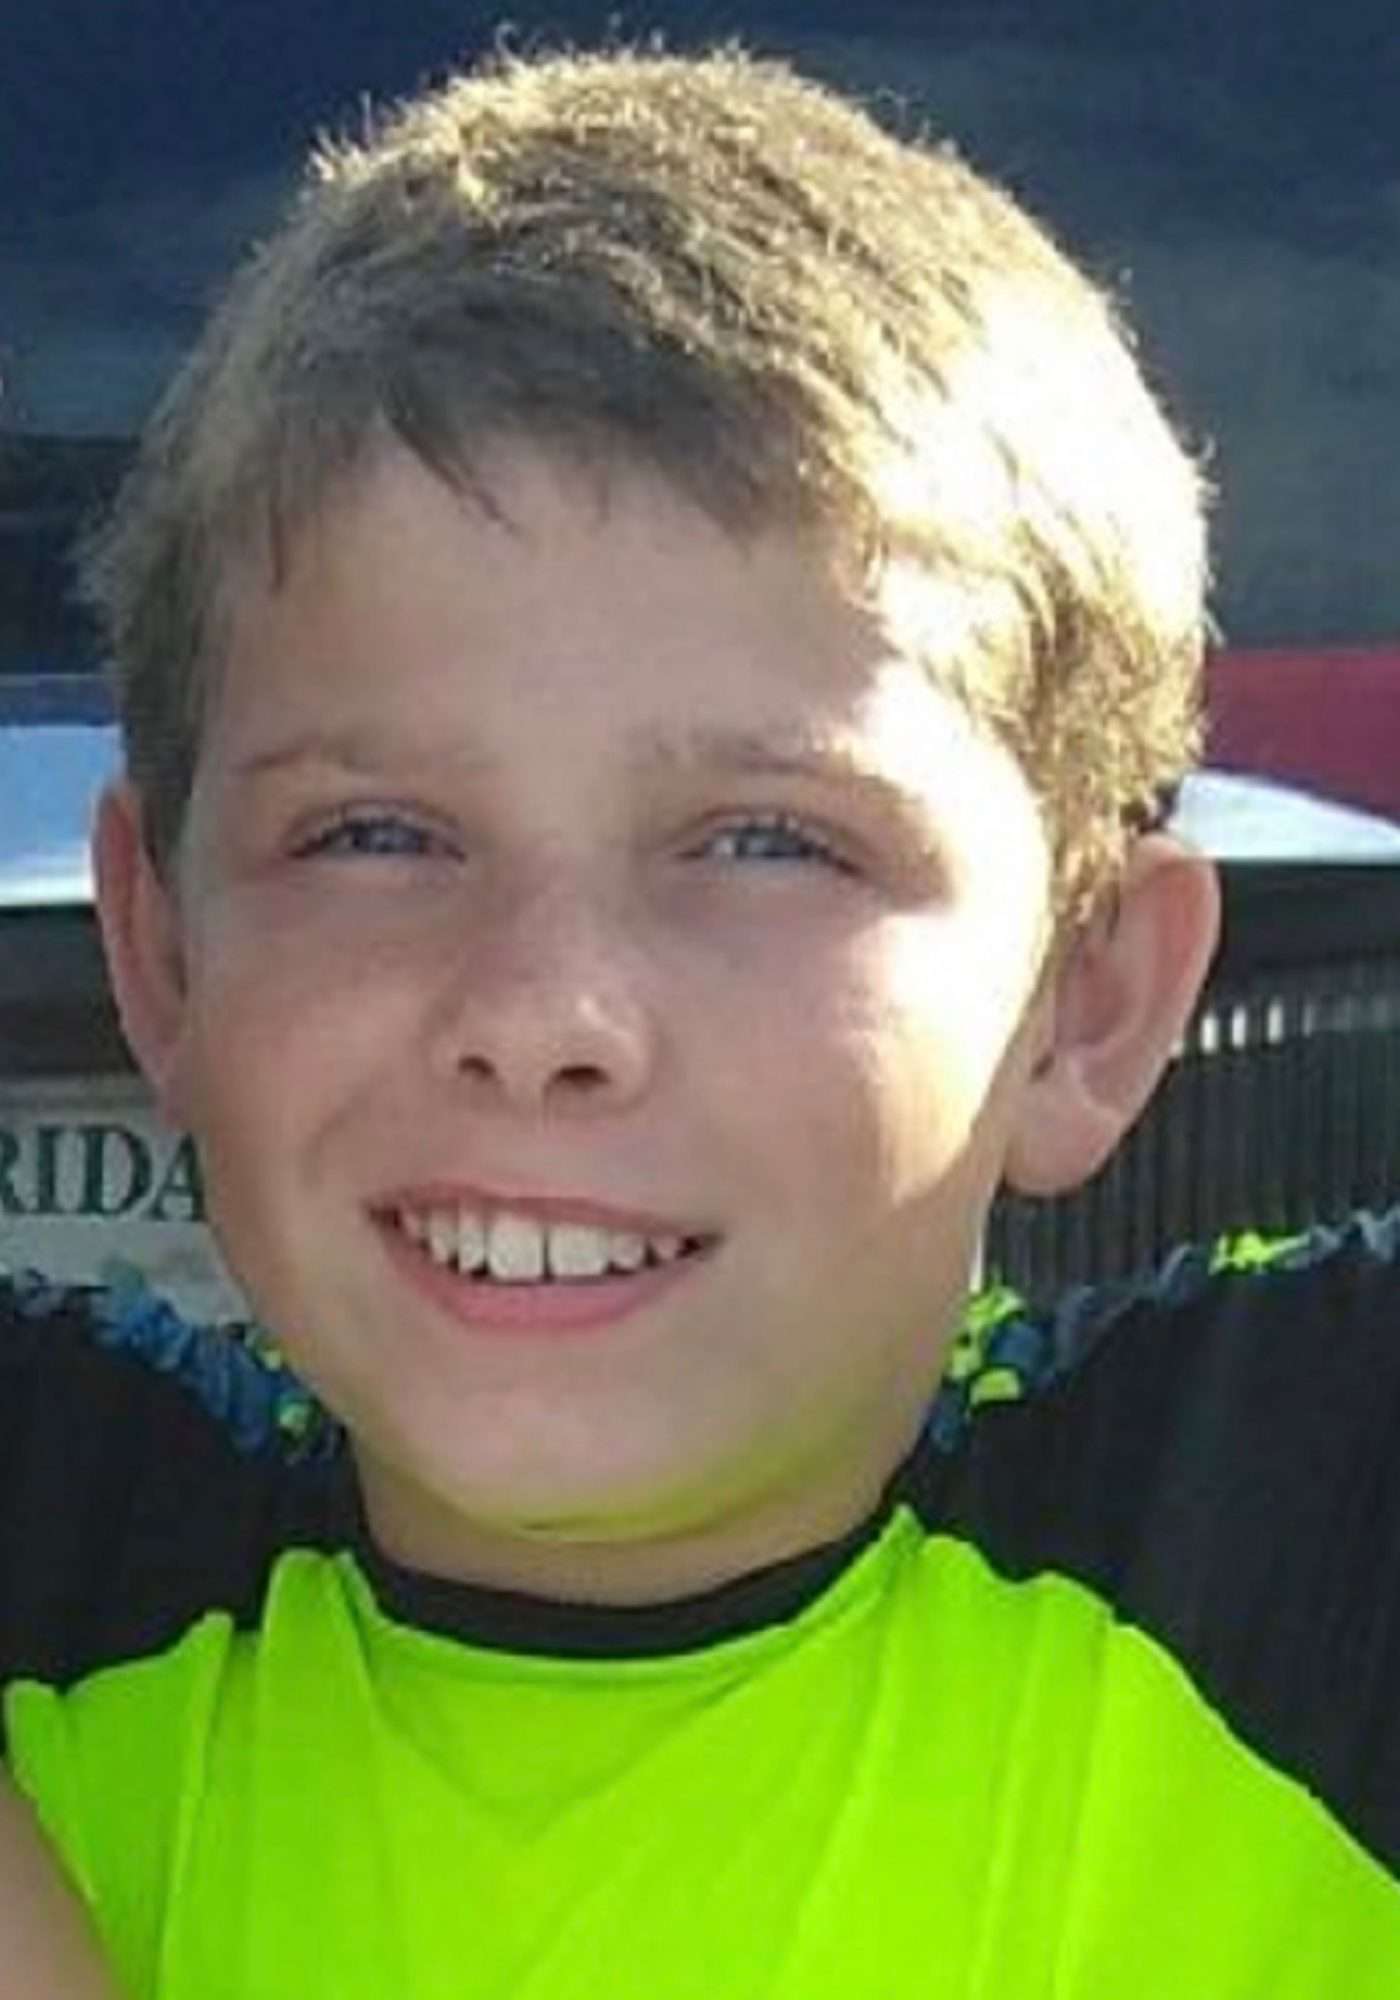 13 Year Old Fla Boy Struck And Killed On Same Road Where Mom Died People Com